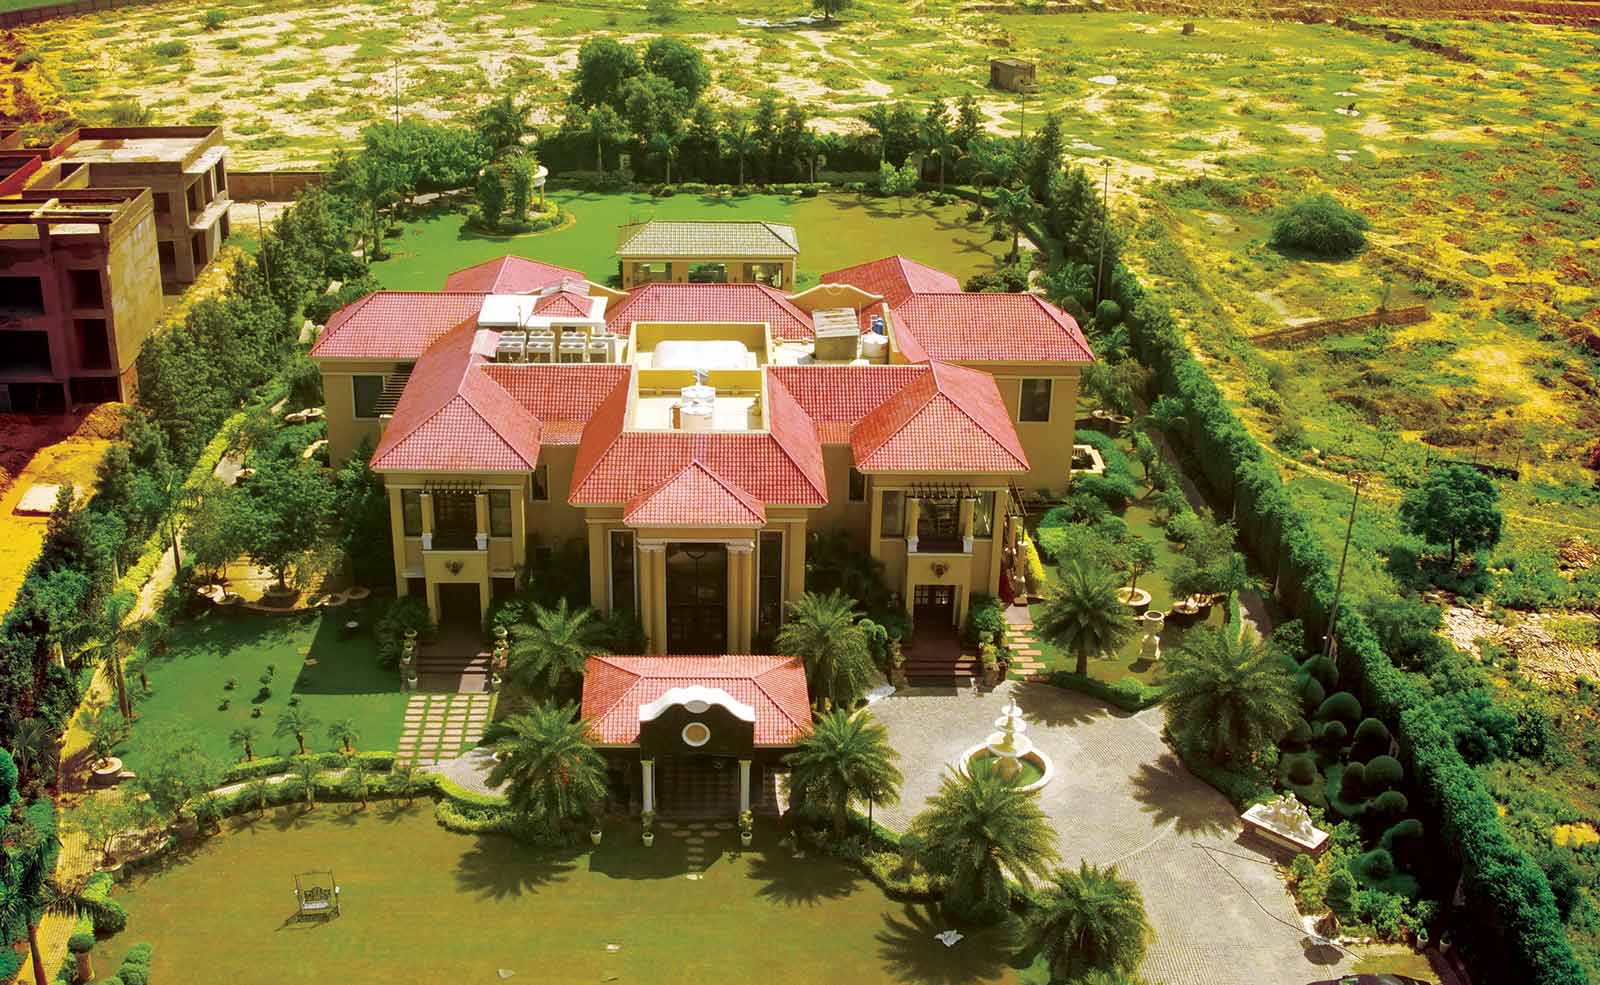 New Farm House in Noida as huge investment opportunity